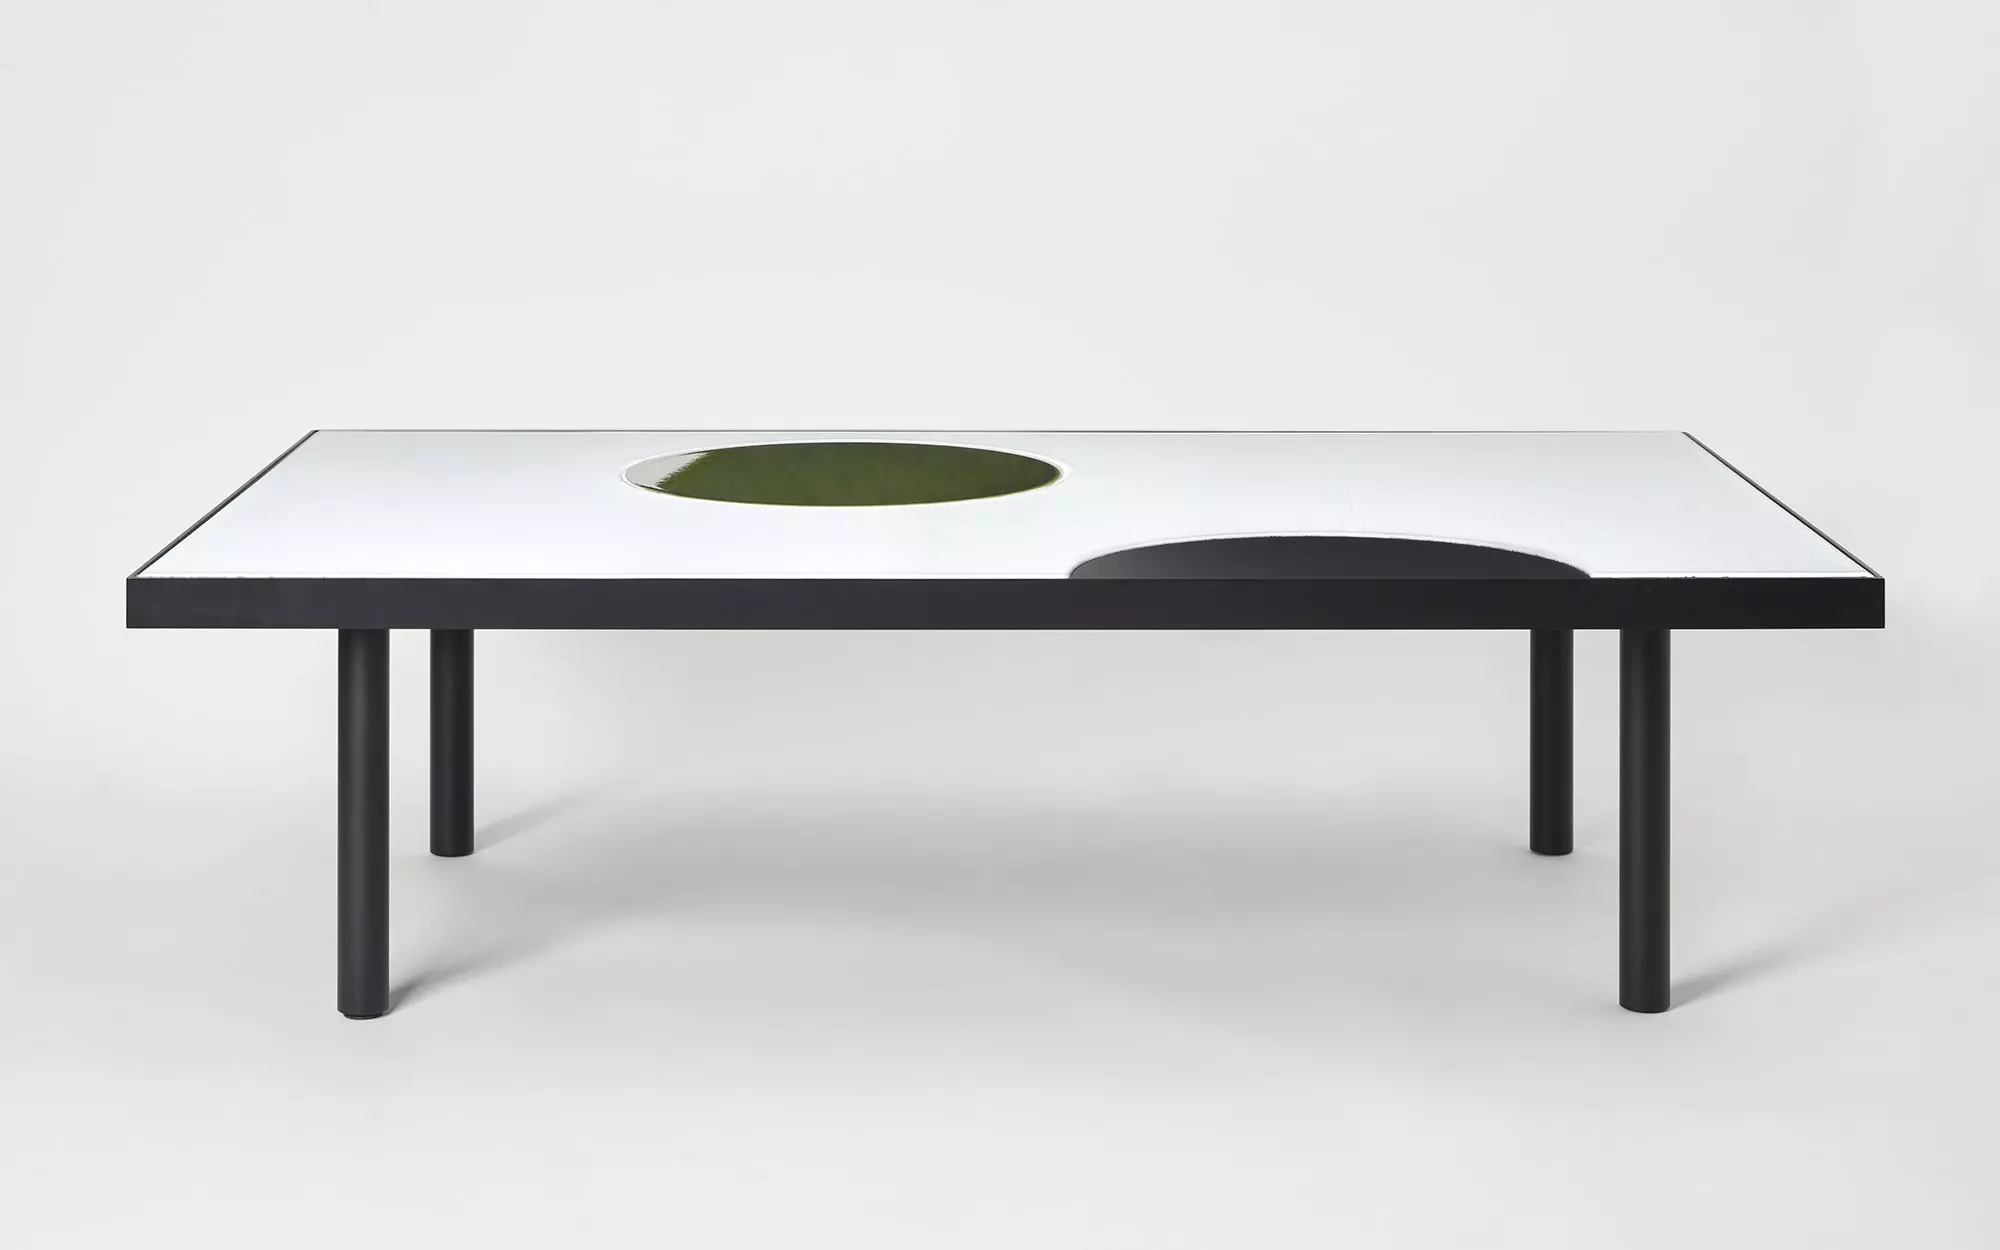 Translation Discolo Coffee Table - Pierre Charpin - coffee-table - Galerie kreo